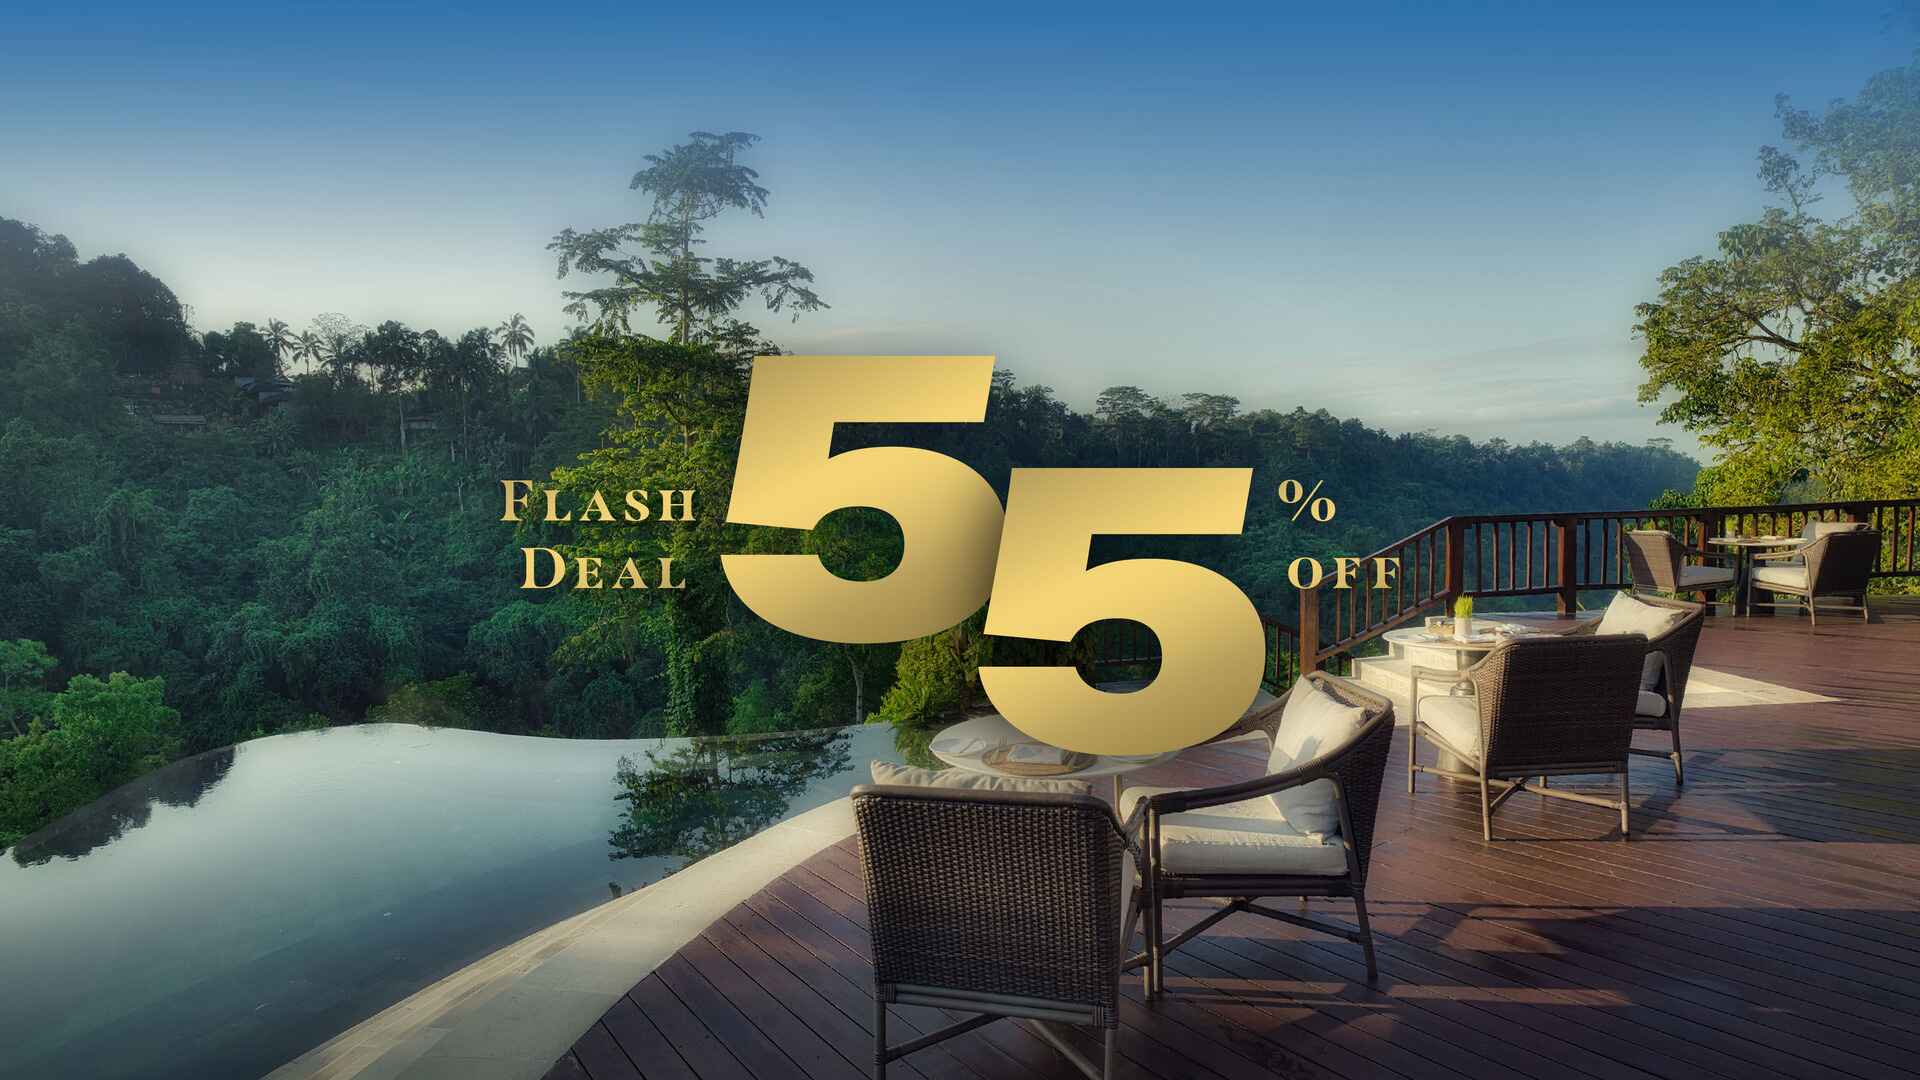 Special Offer - Congrats! Your Jungle Bali Paradise Awaits with 55% OFF